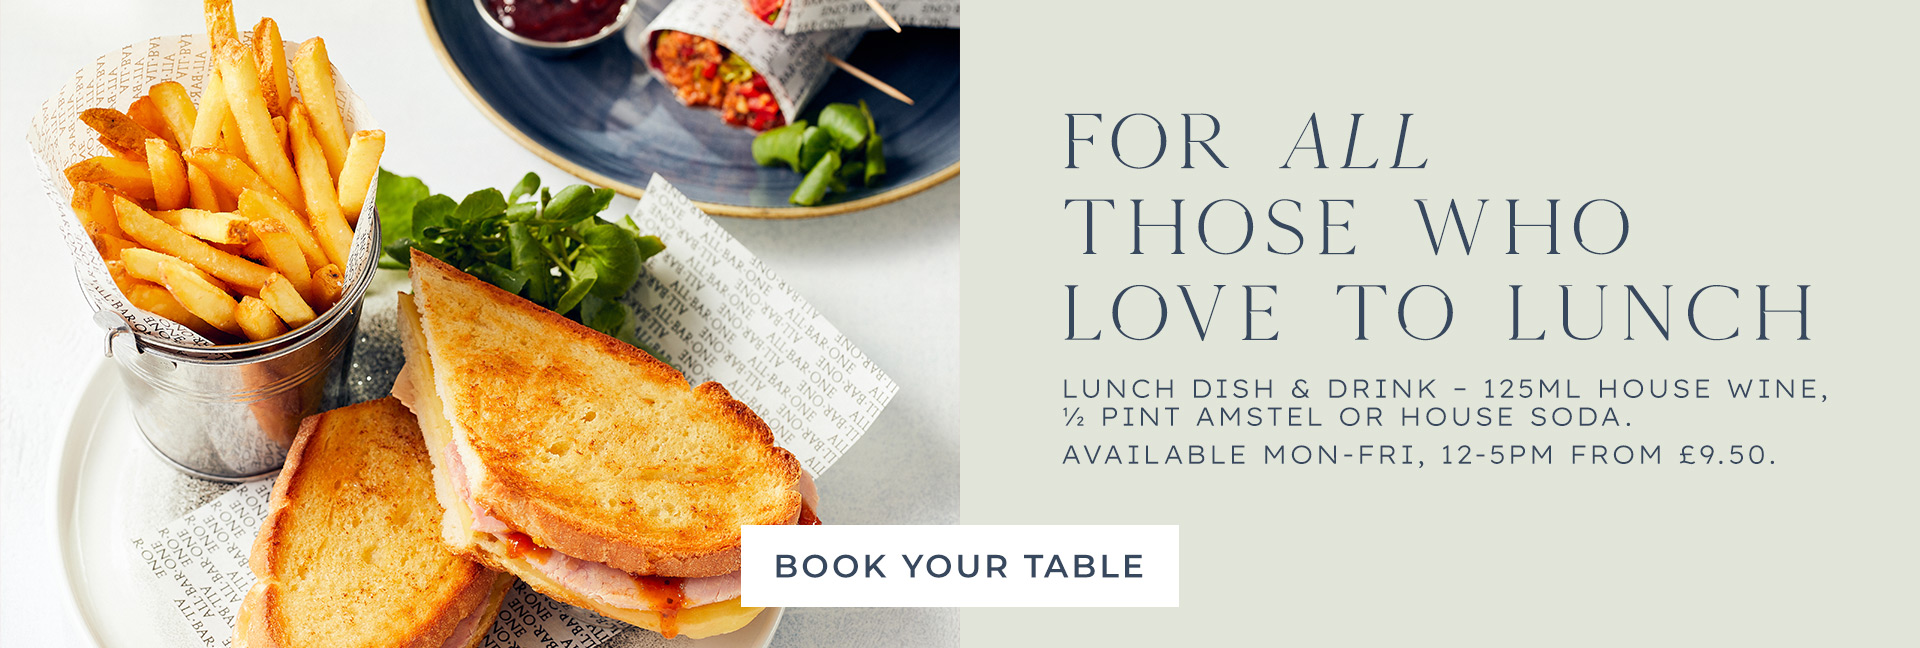 Lunch Offer at All Bar One Harrogate